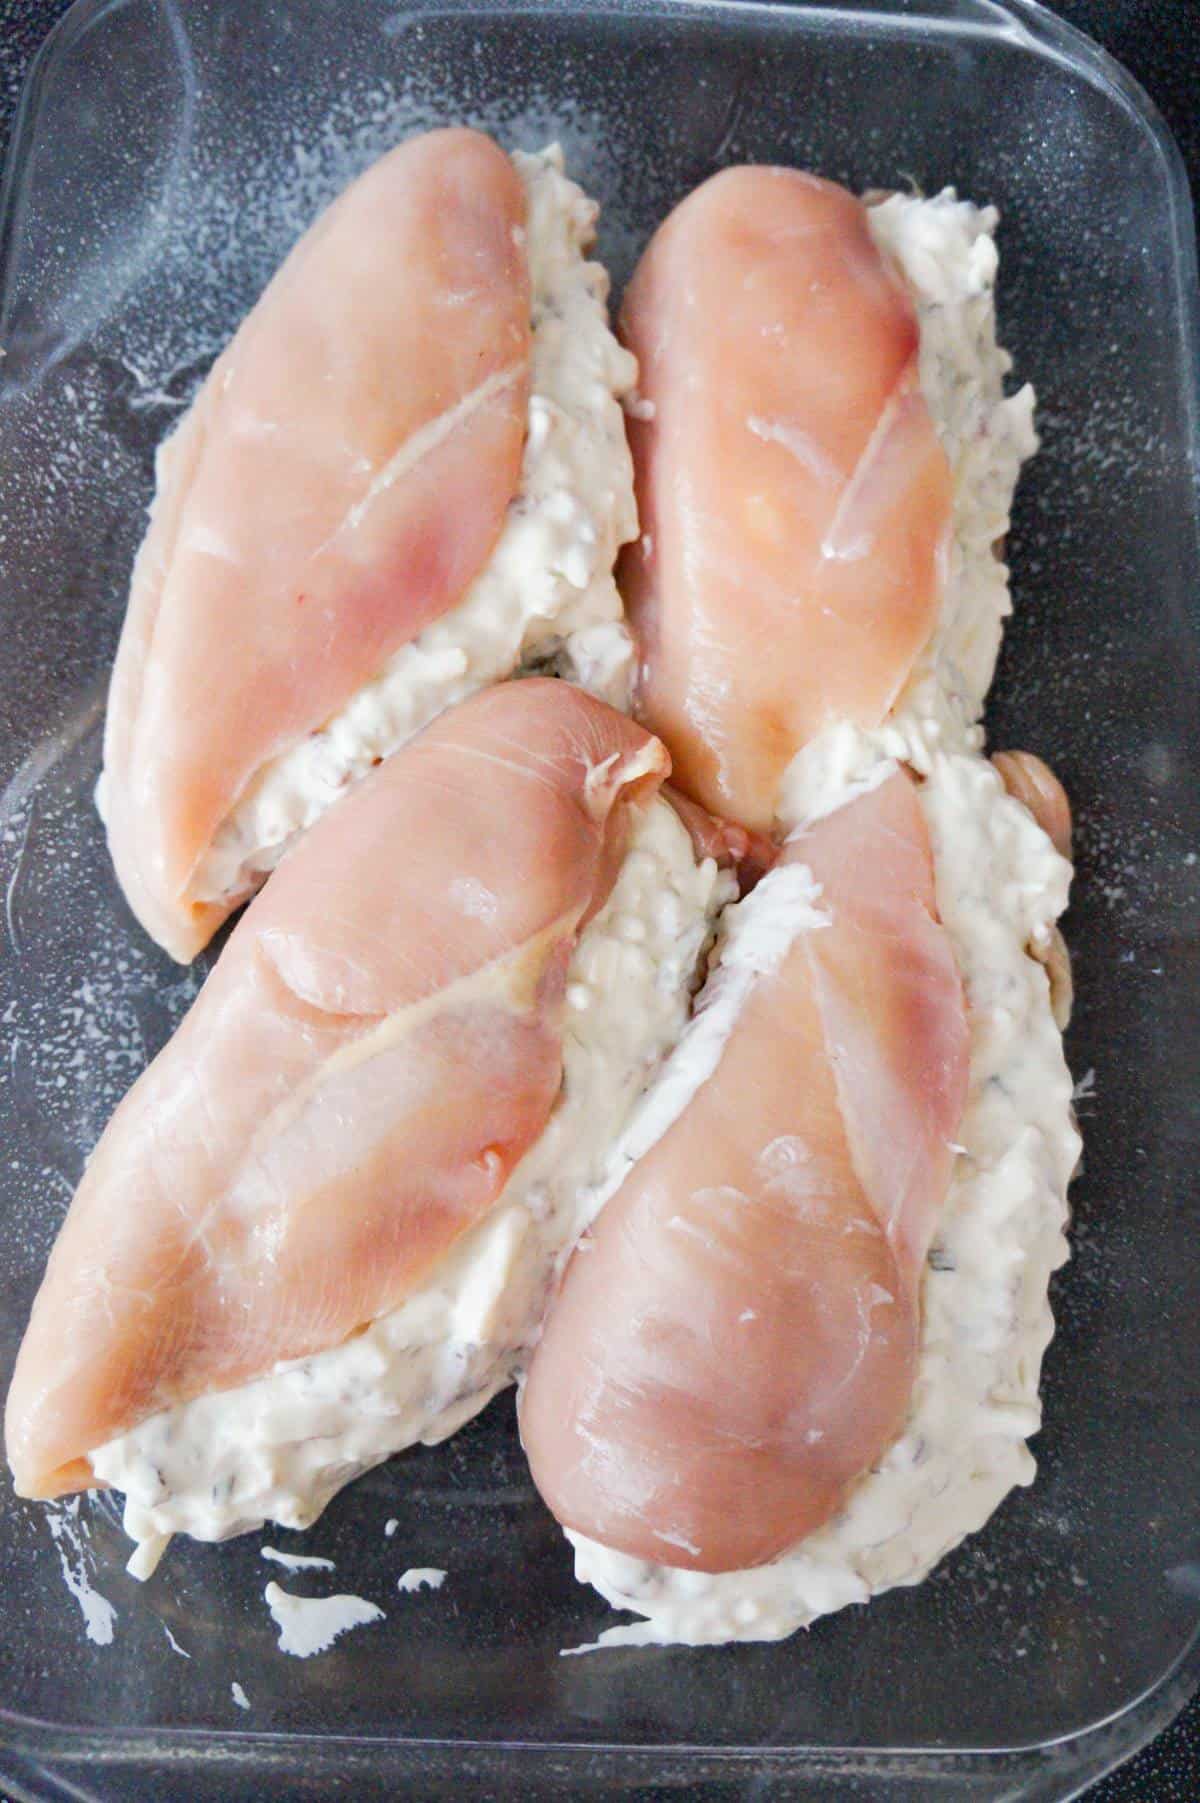 cream cheese and bacon stuffed chicken breasts before baking